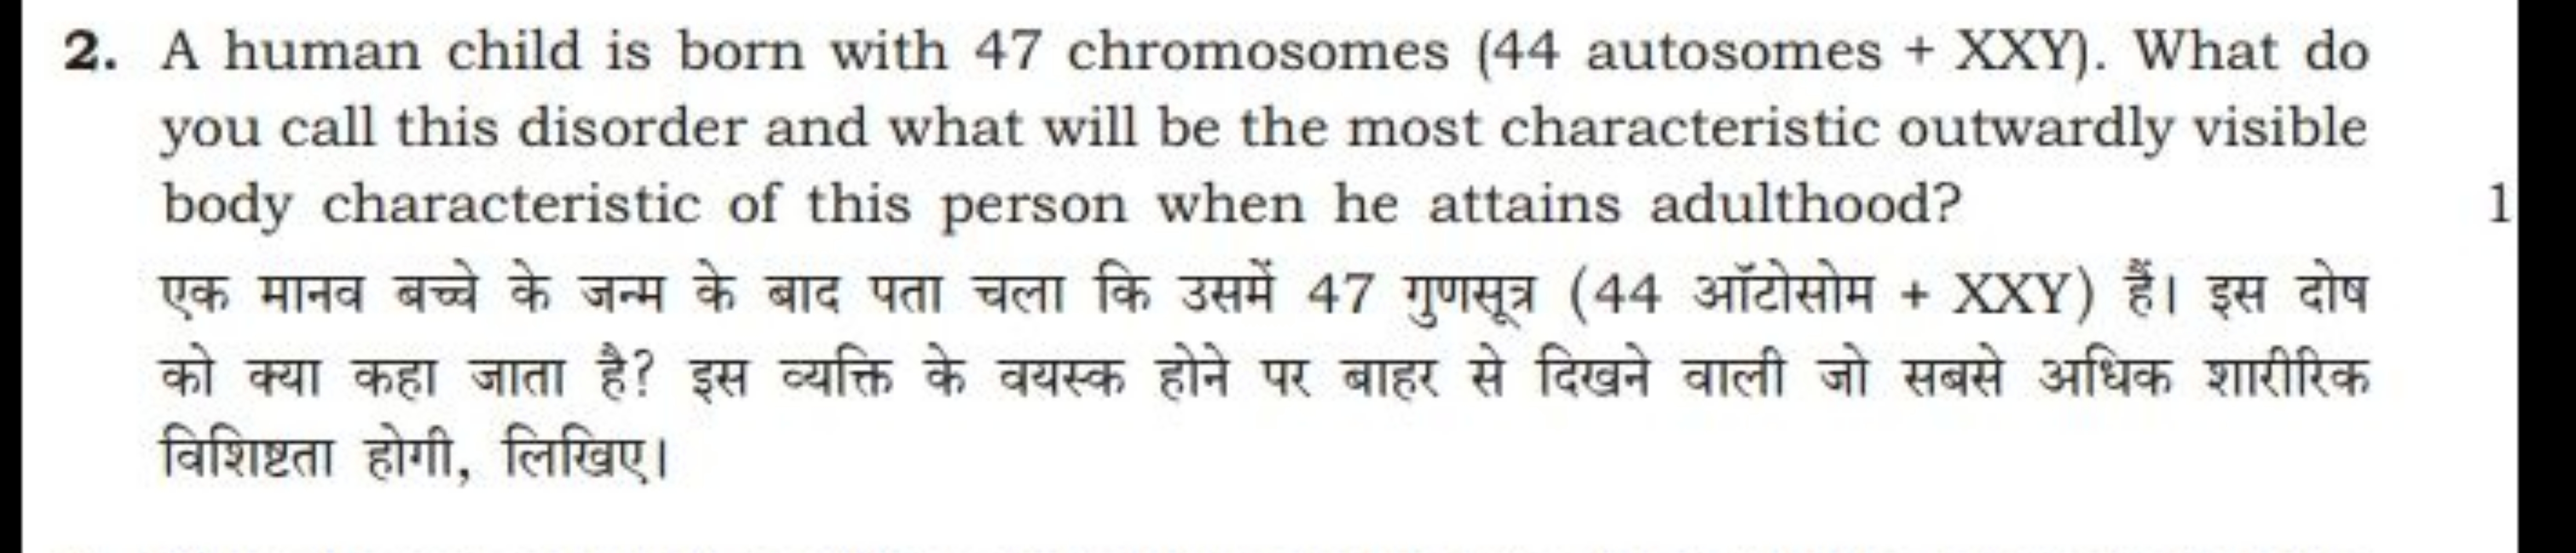 2. A human child is born with 47 chromosomes ( 44 autosomes +XXY ). Wh